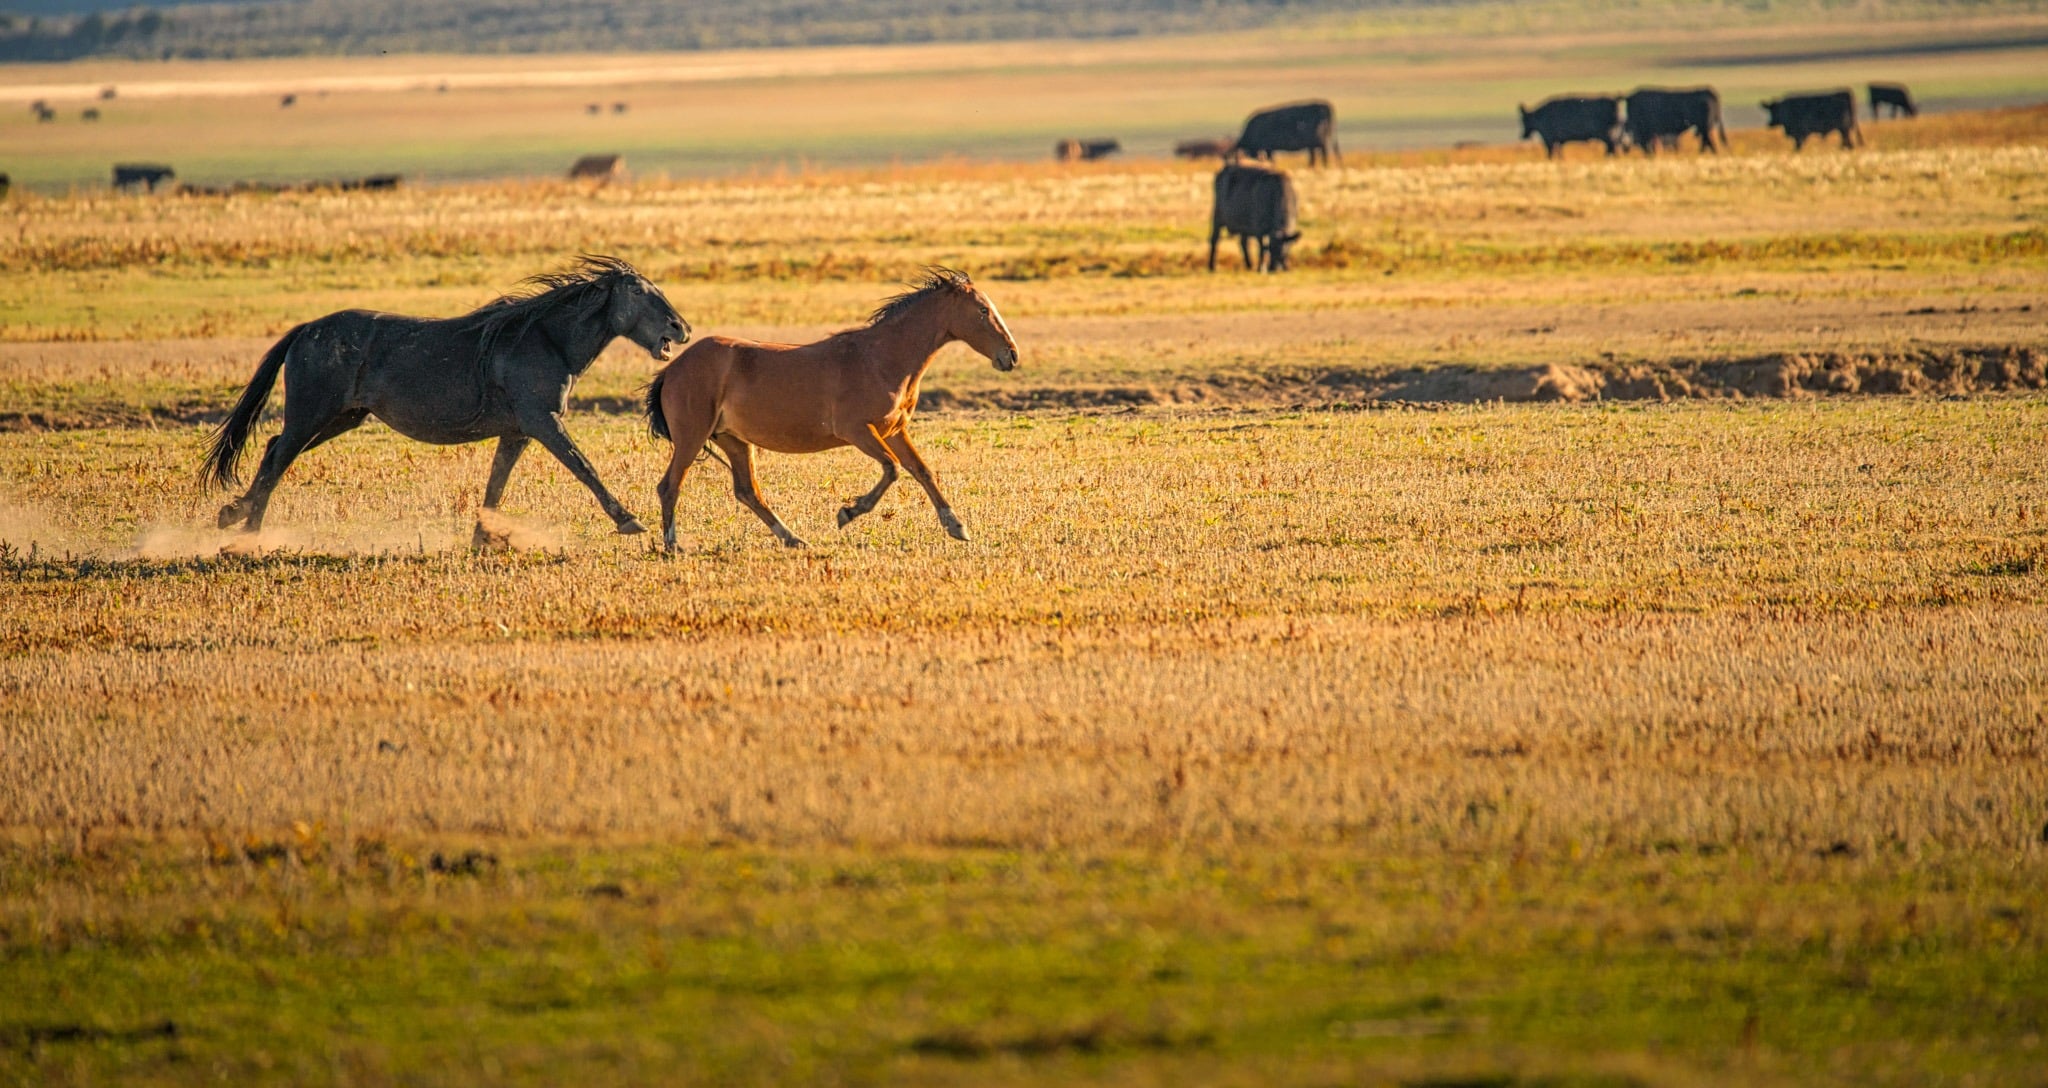 One wild horse is chasing another, ready to bite its rump if it gets close enough. These wild horses are found on the San Pedro Mesa in the San Luis Valley of Colorado.